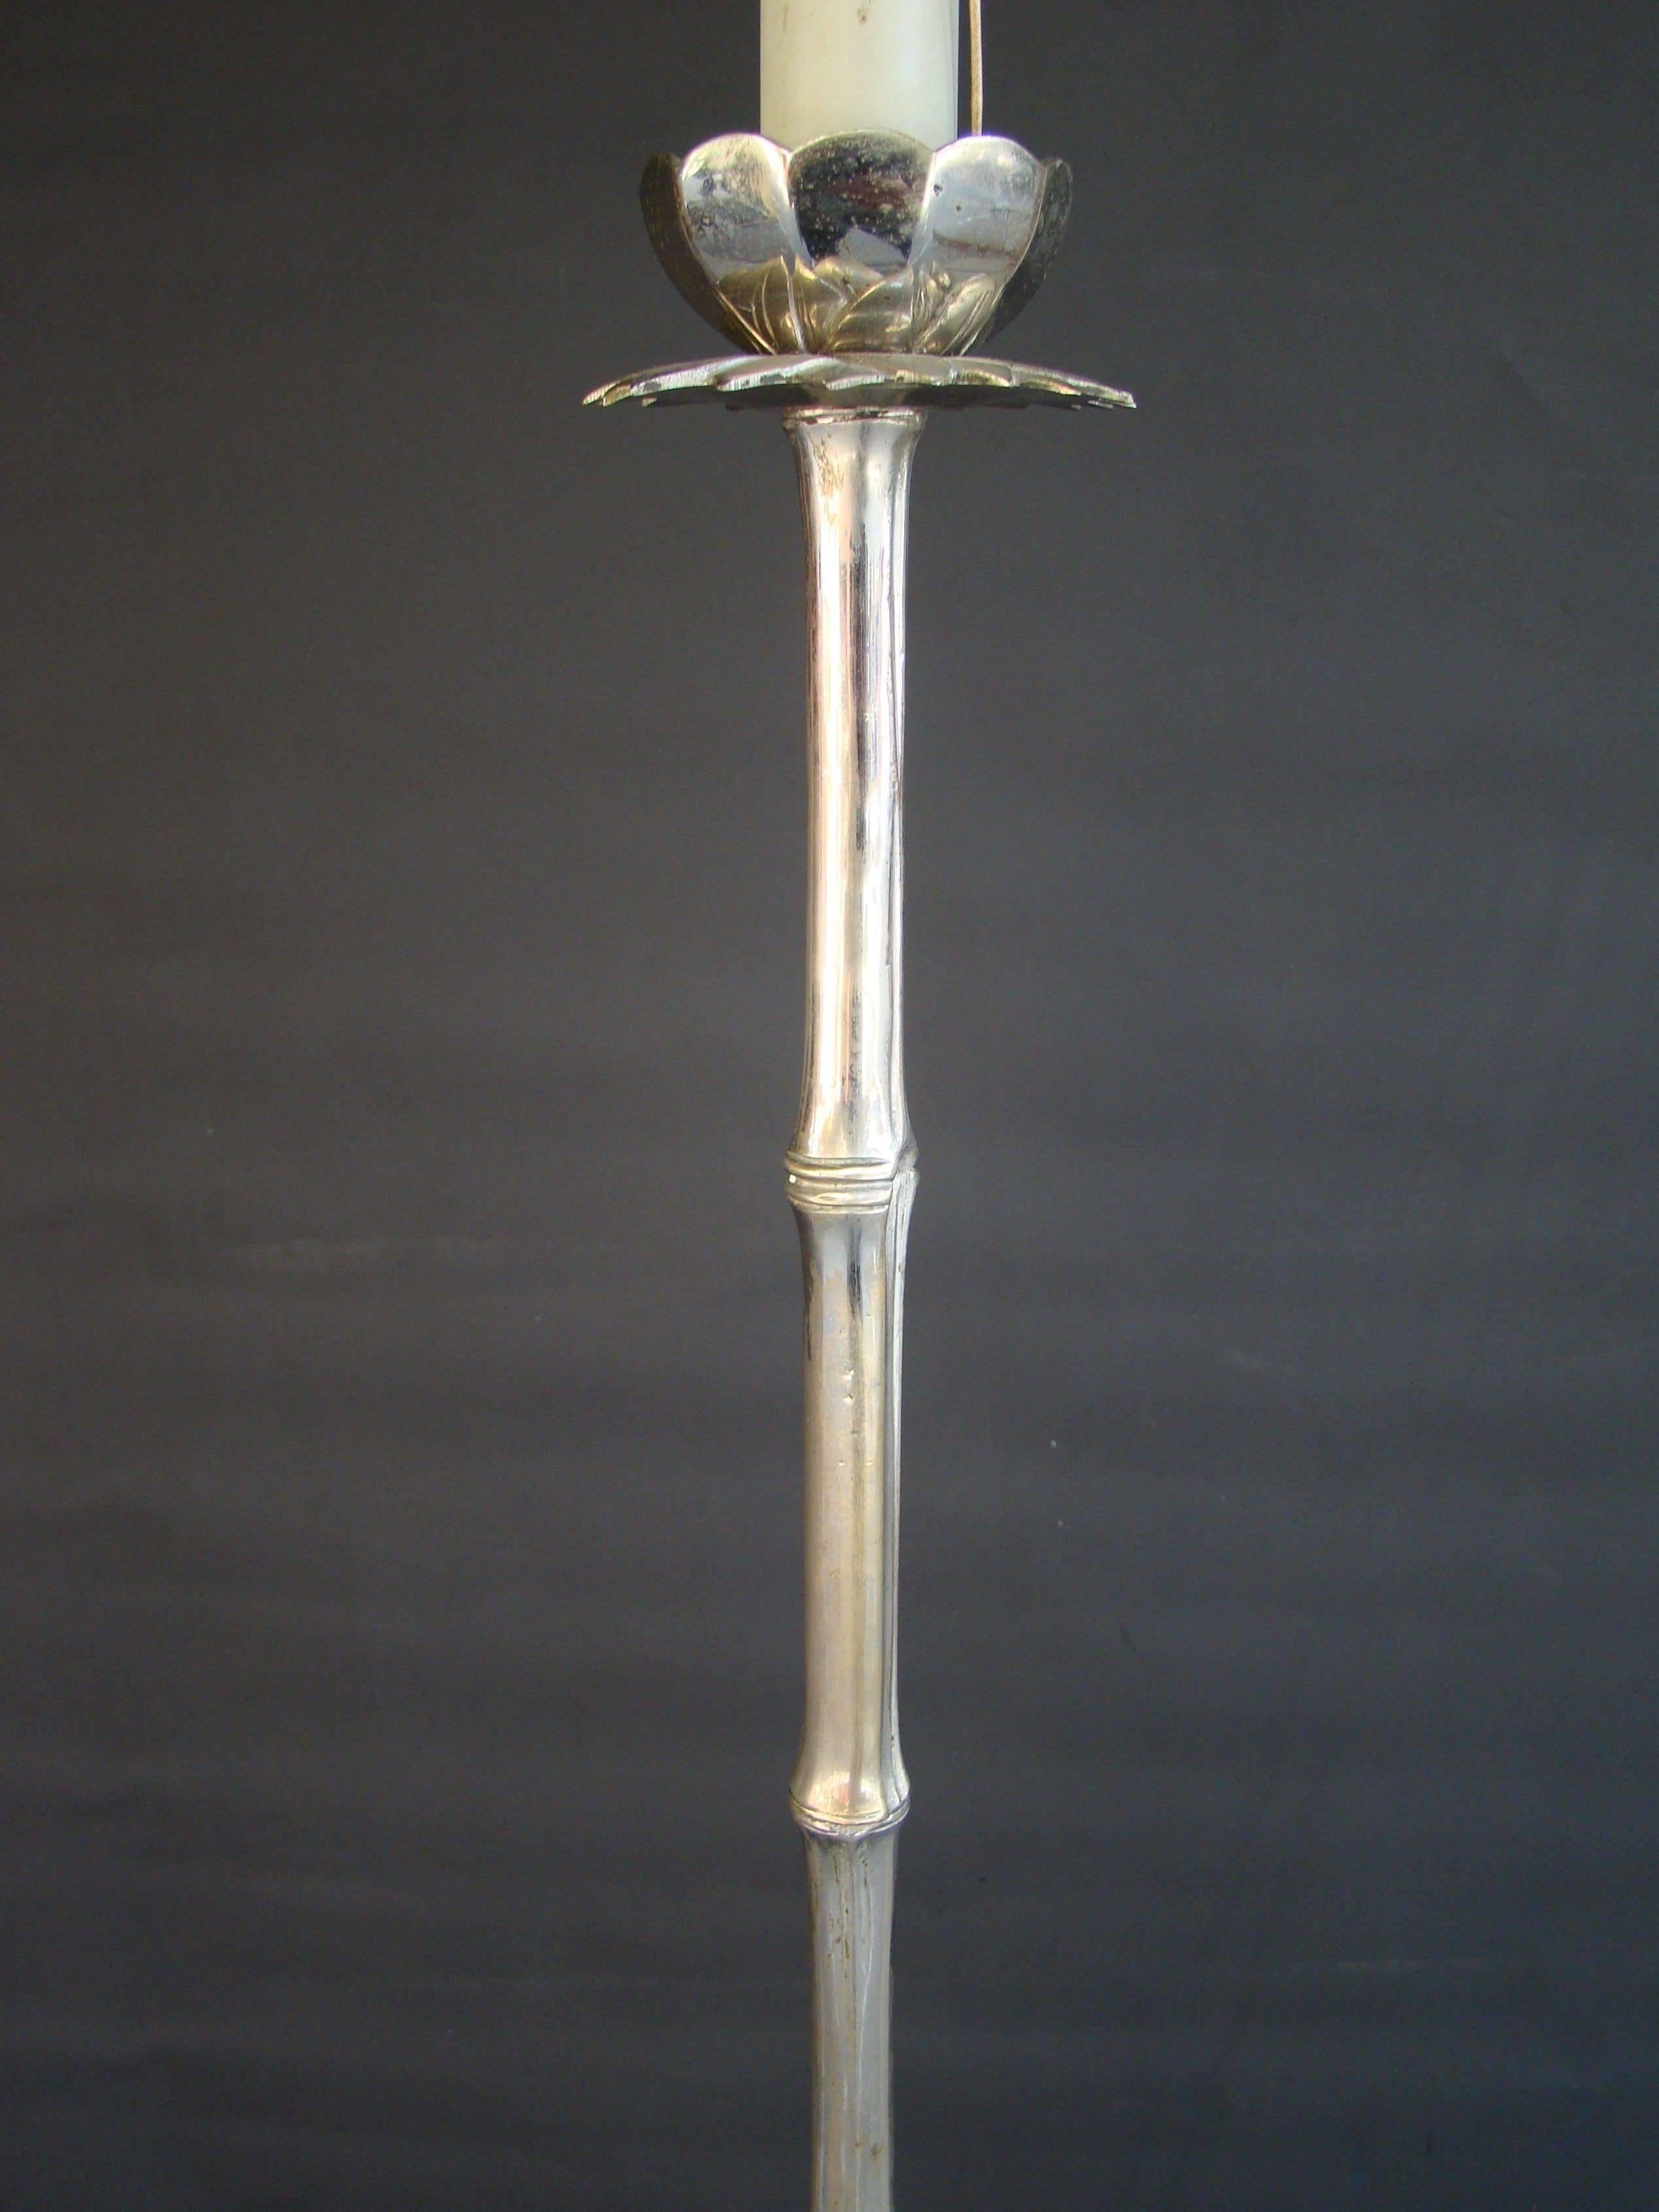 Handsome silvered bronze tripod floor lamp decorated with a faux bamboo with a palmtree topic by Maison Baguès, circa 1960.